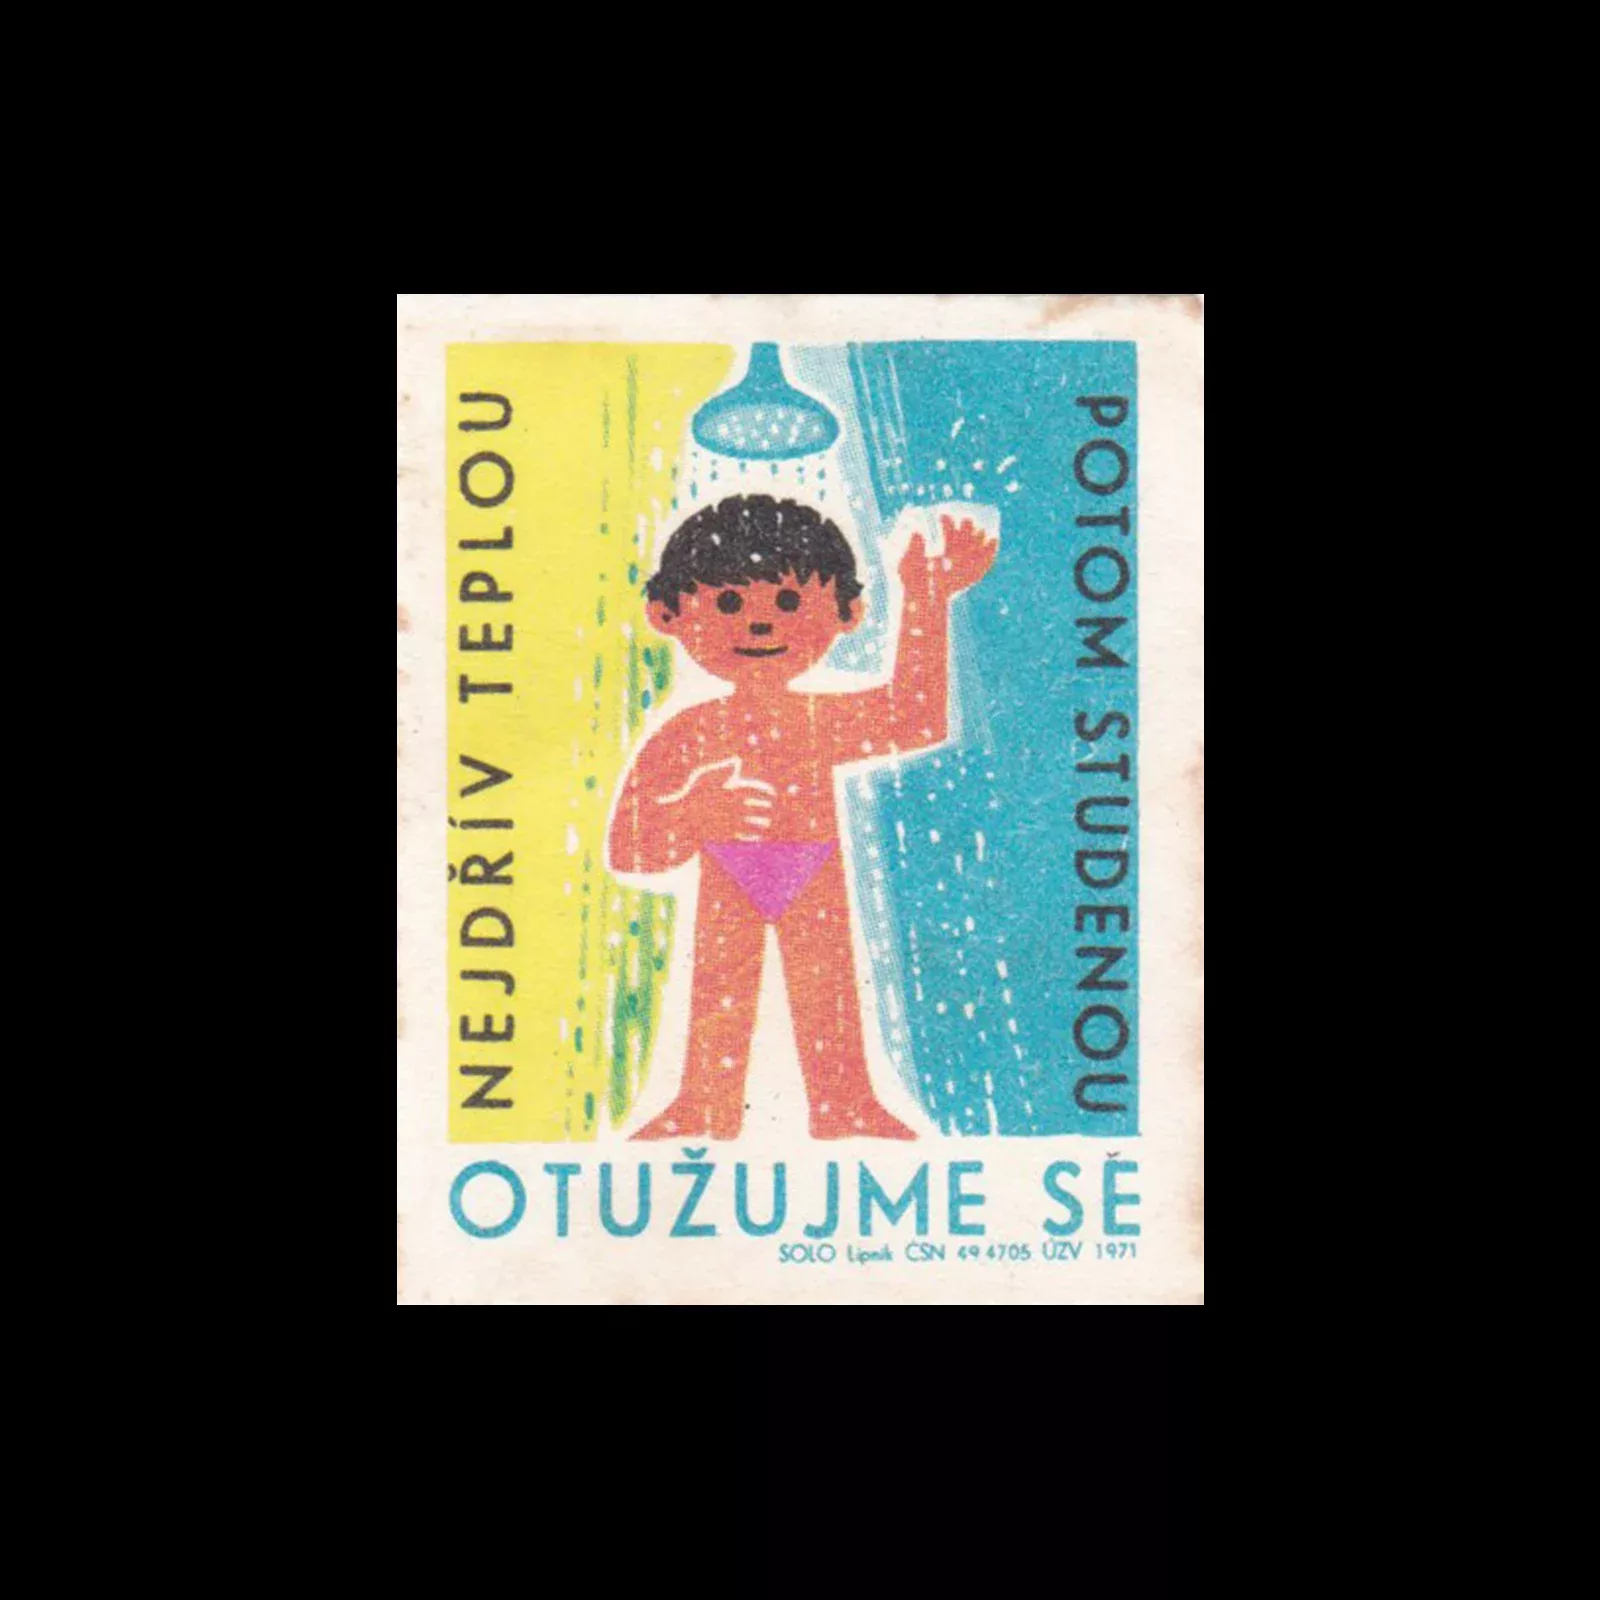 We Are Learning, Czech Matchbox Labels, 1971